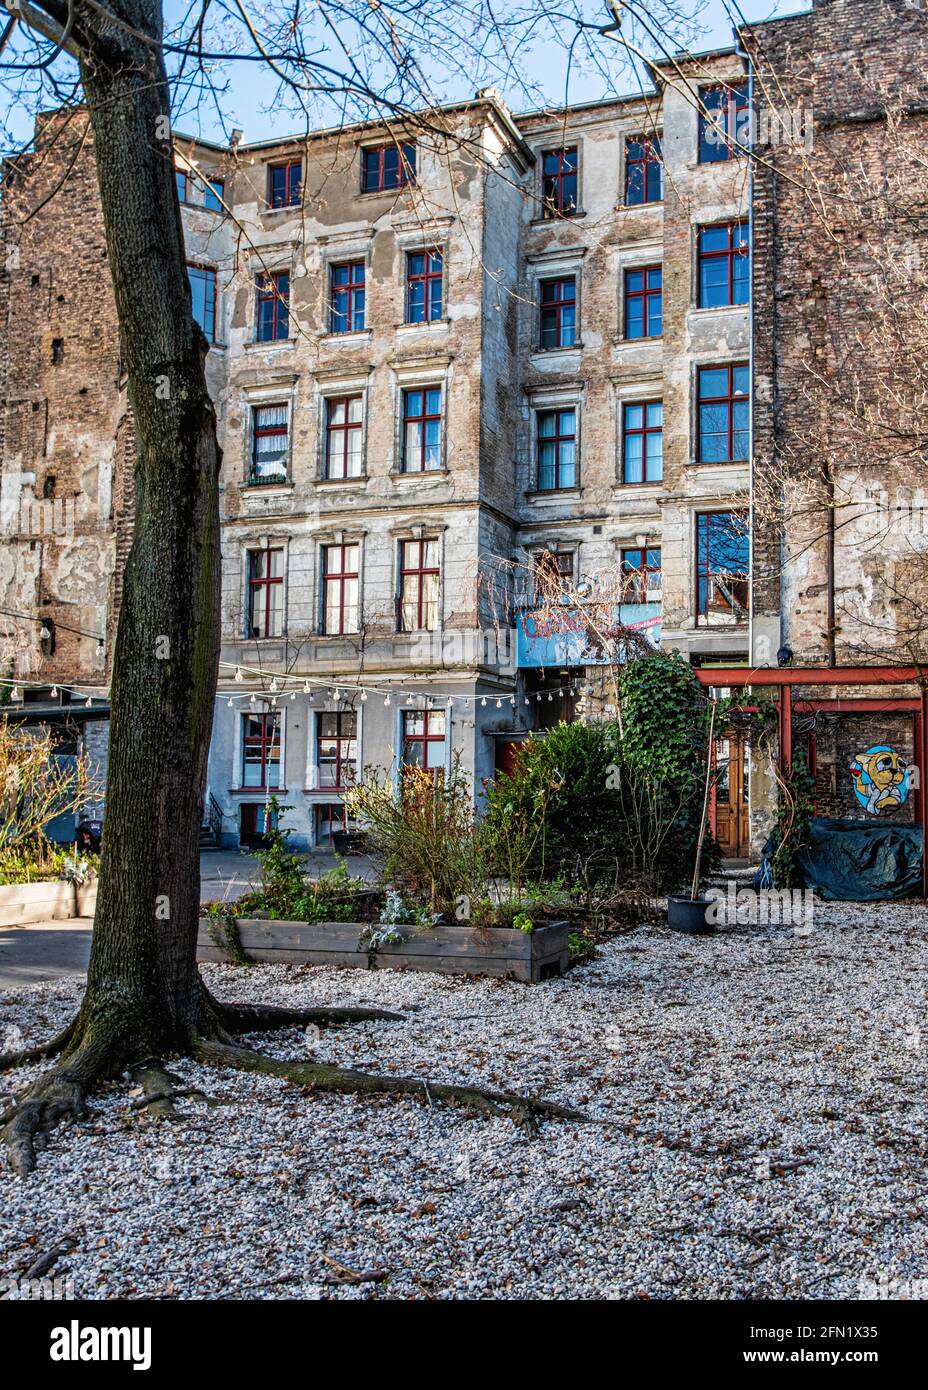 Clärchens Ballhaus garden, famous, historic dancehall is losed for renovation. by new owner. Auguststrasse, Mitte,Berlin Stock Photo